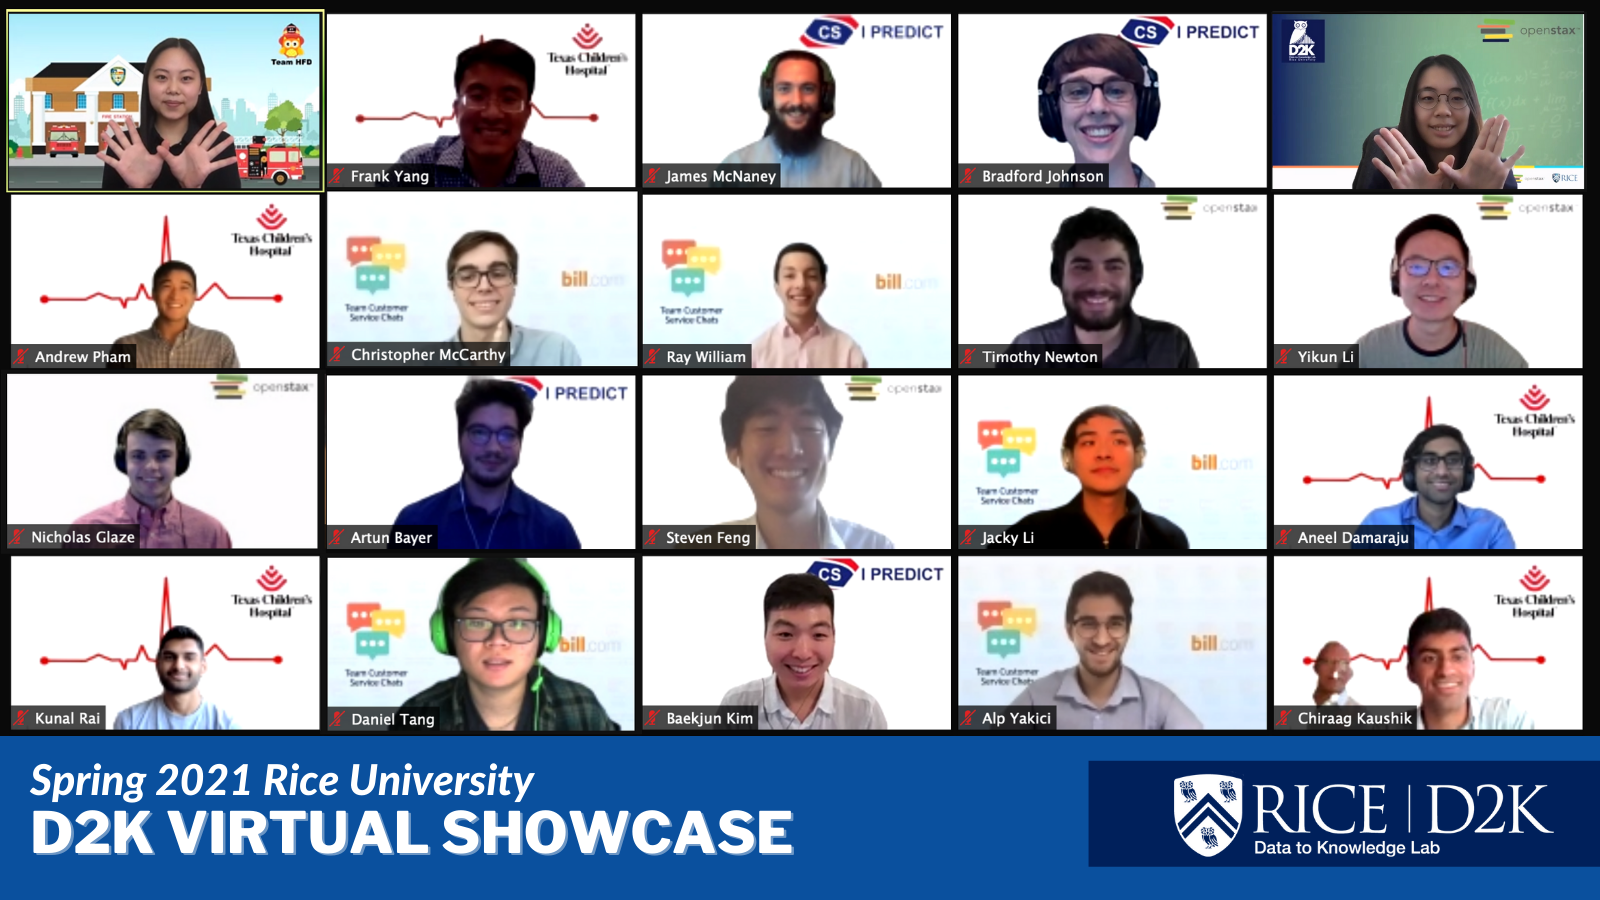 Rice Data to Knowledge Lab Spring 2021 Showcase Winners